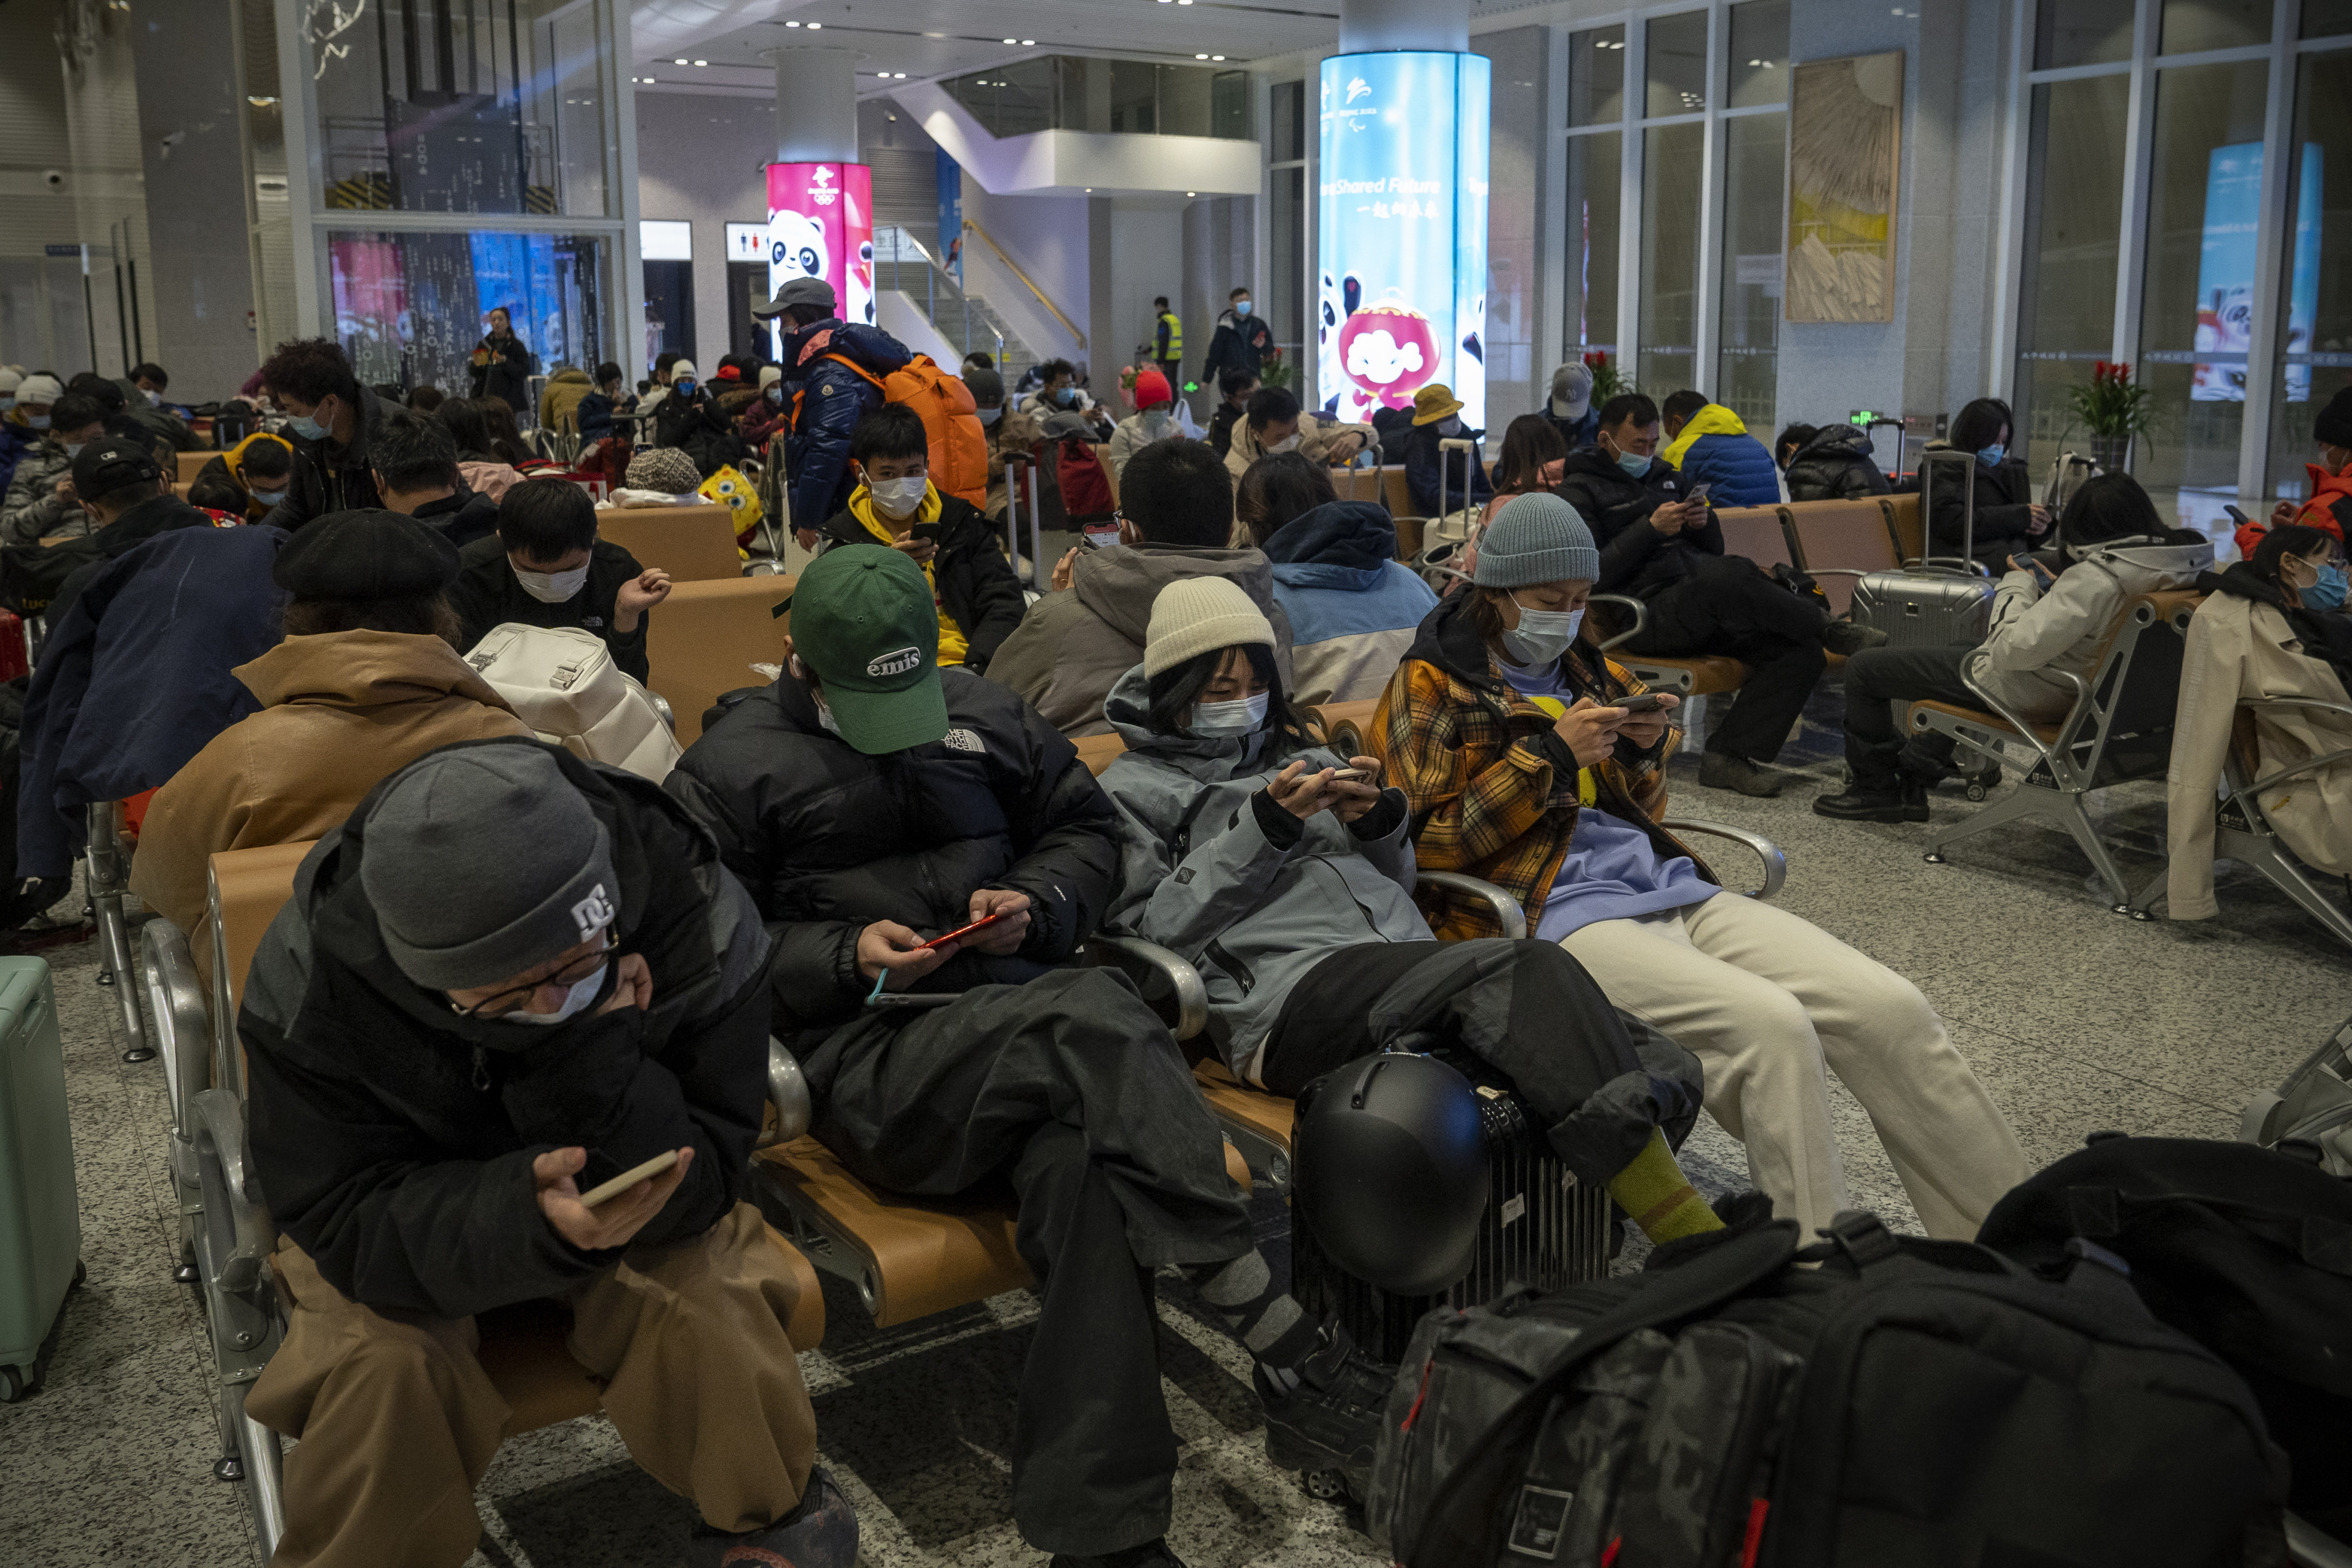 More Chinese cities are expected to tighten travel restrictions over the Lunar New Year holiday given the potential spread of Omicron. Photo: Bloomberg